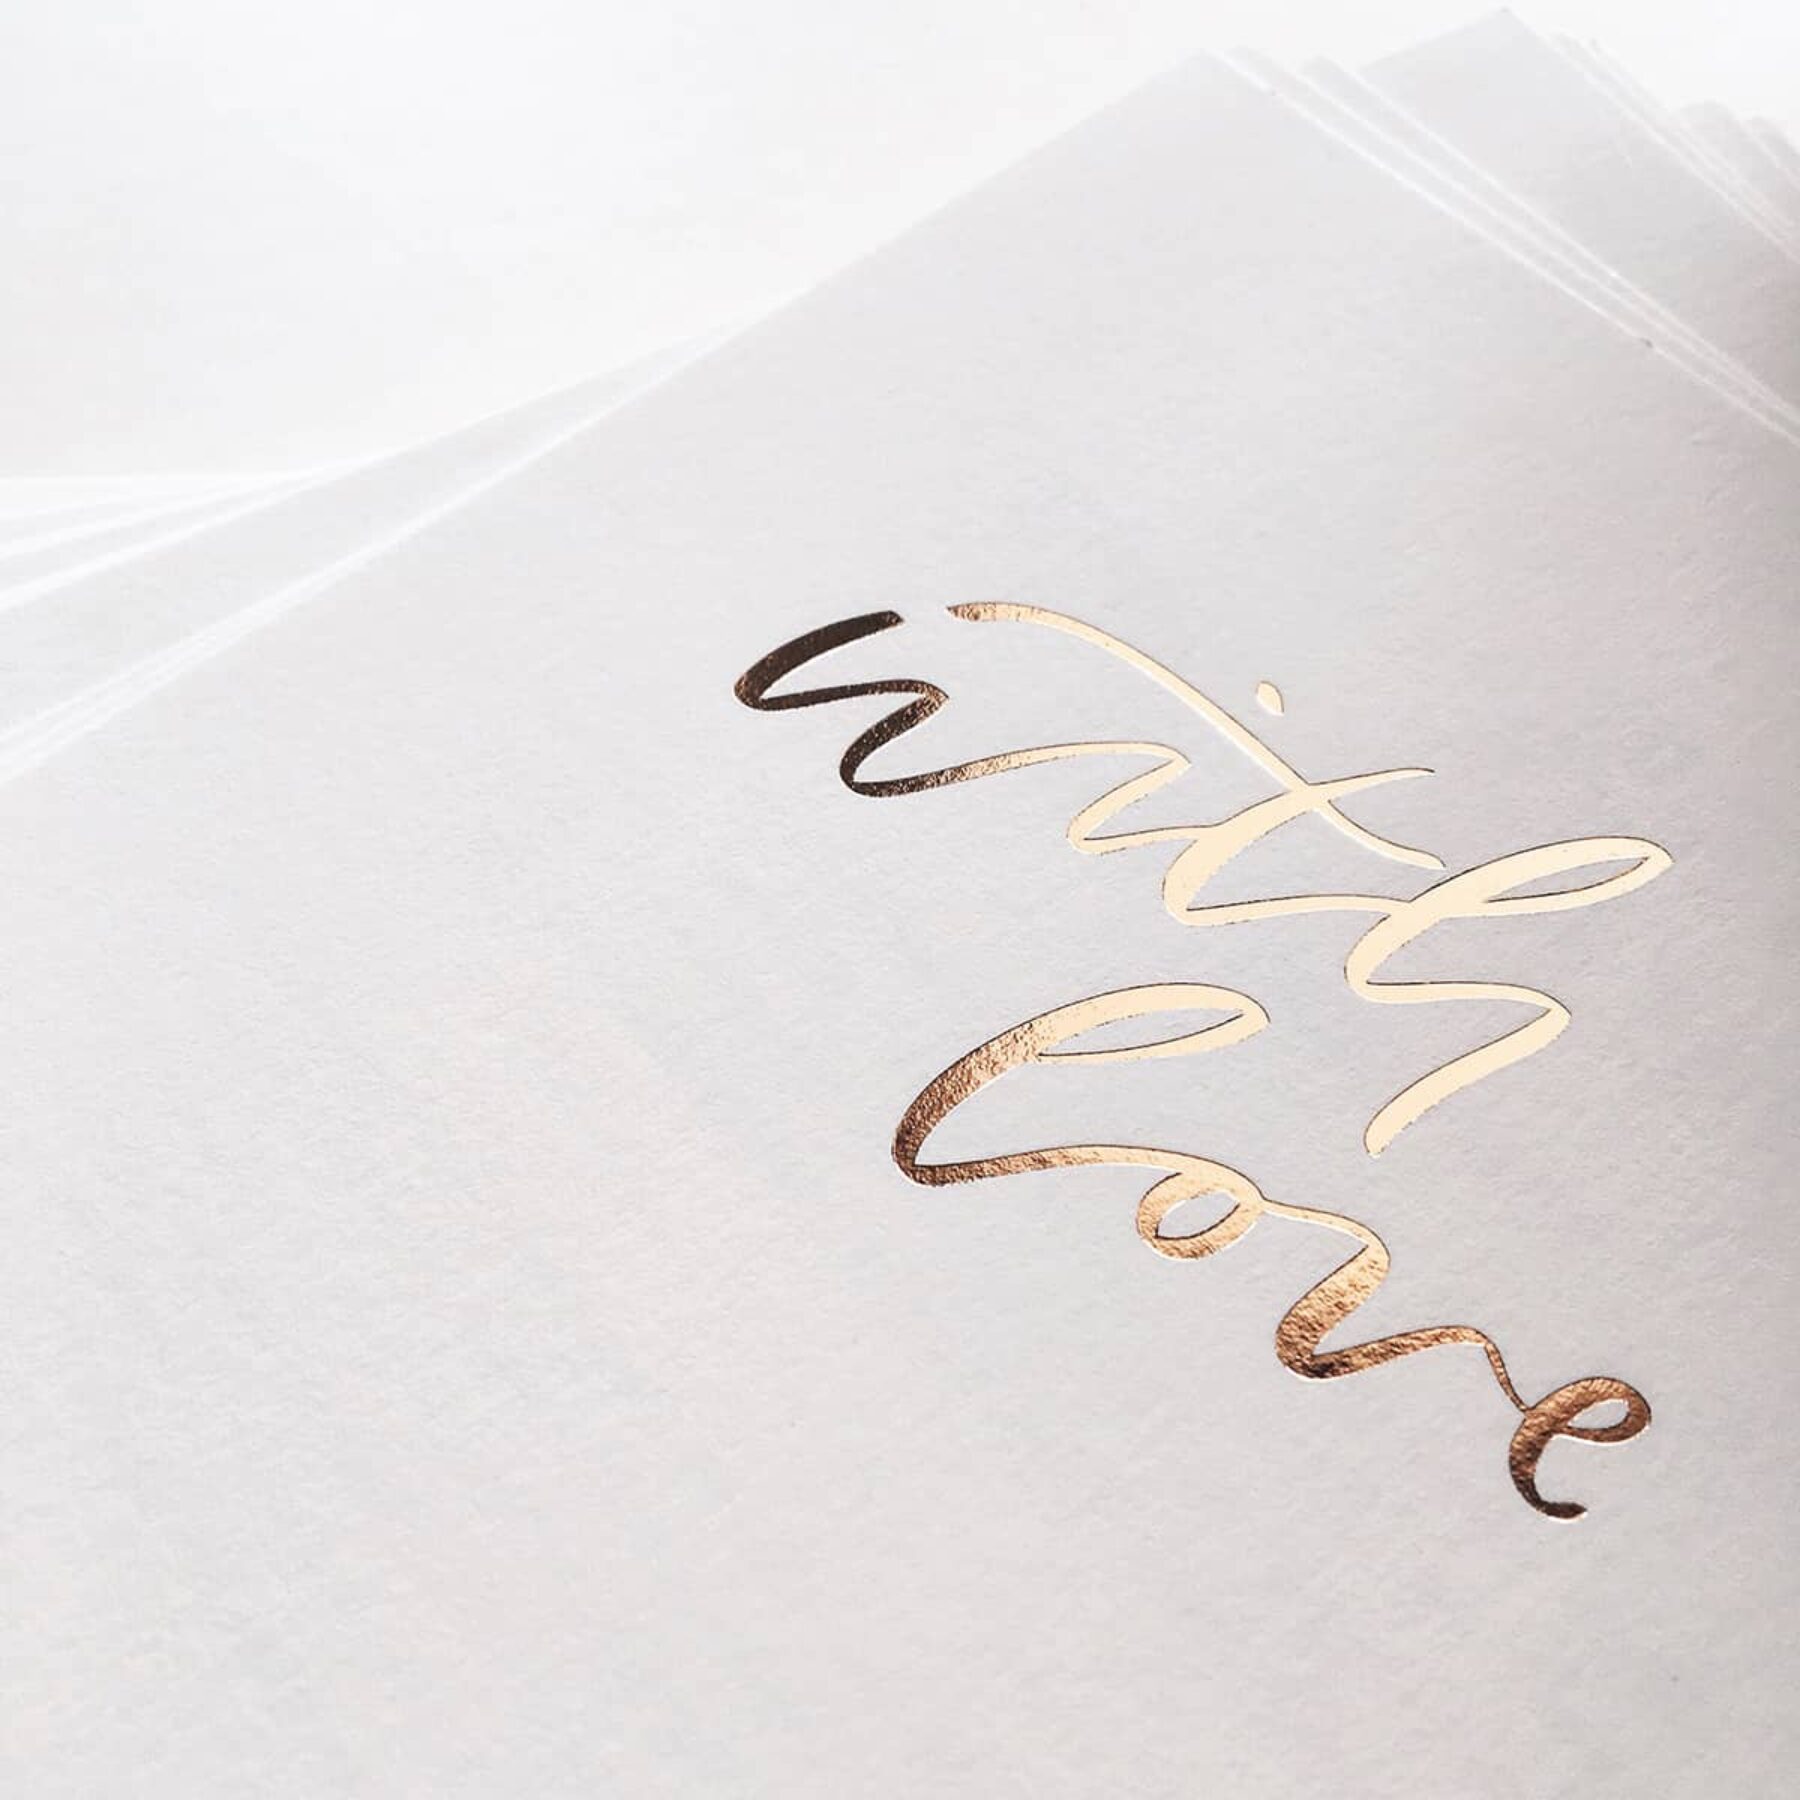 'with love' gold calligraphy letterpress wedding stationery by Paige Tuzee